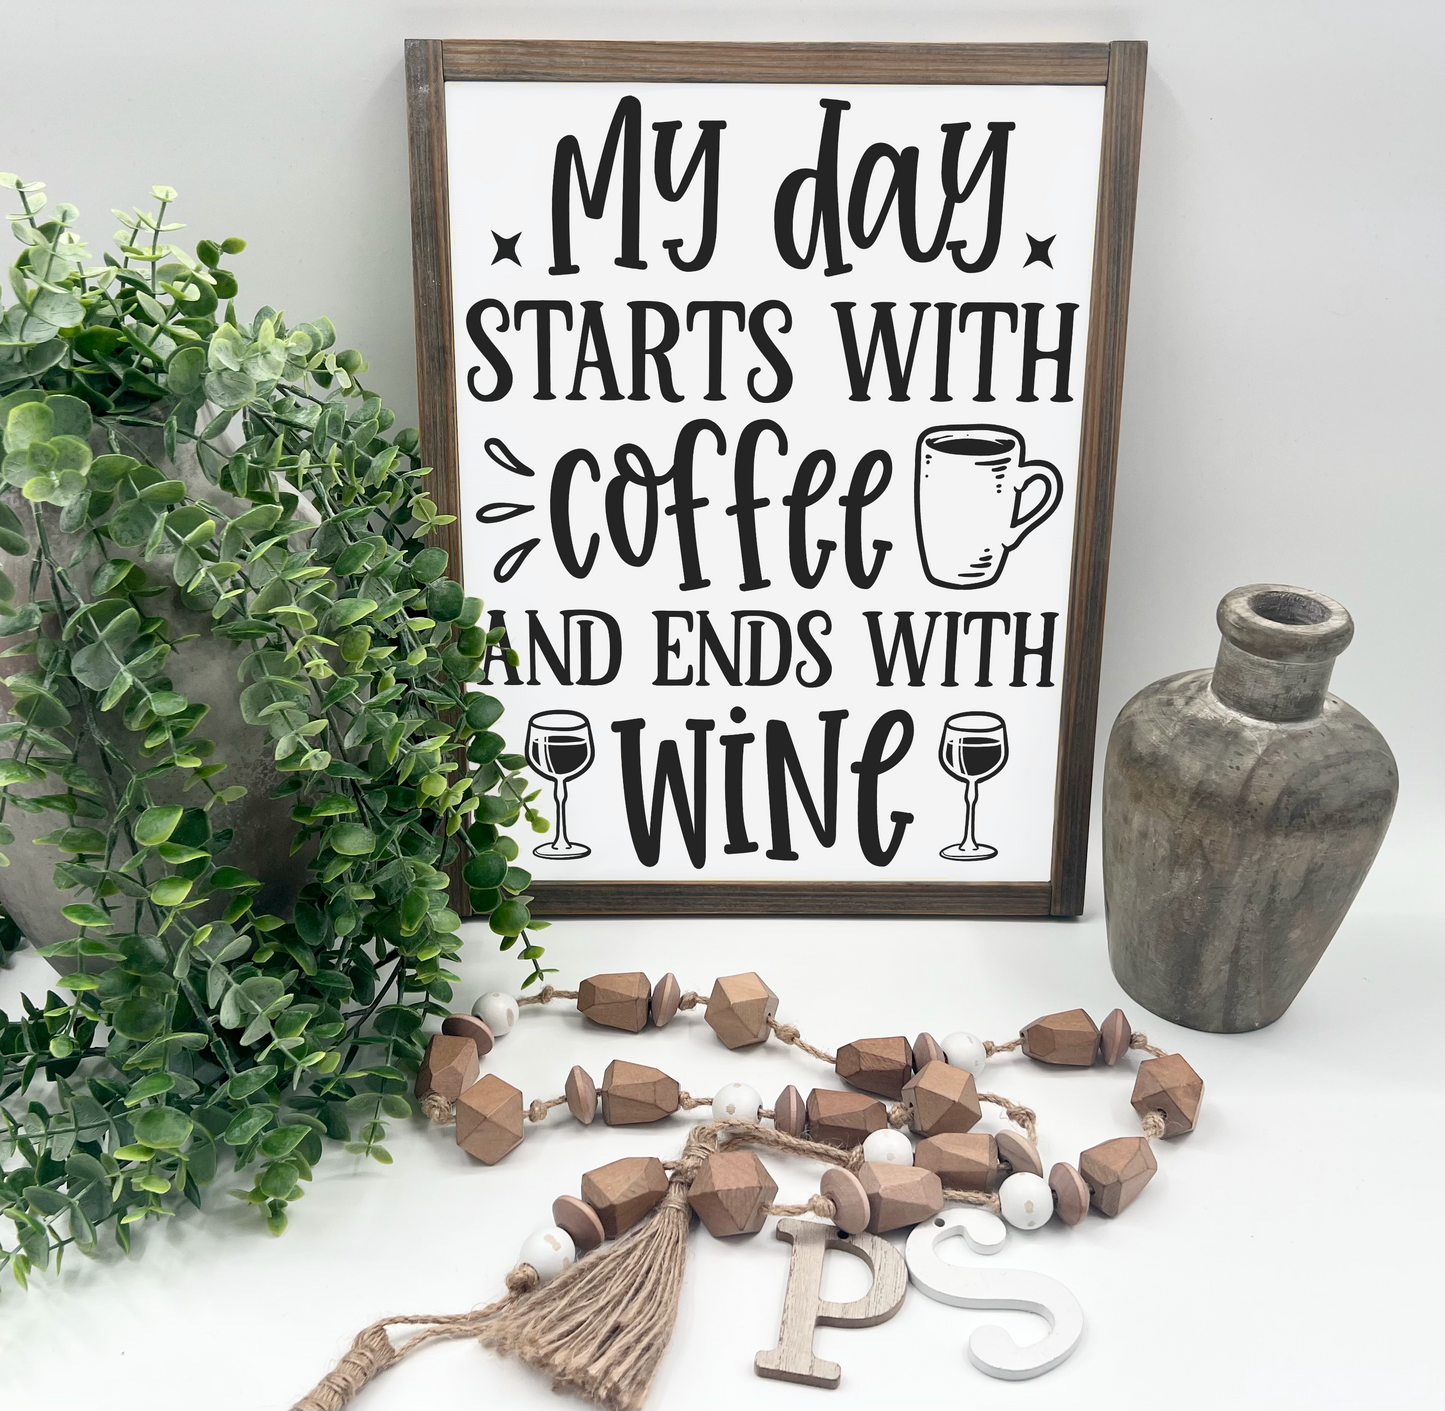 My Day Starts With Coffee And Ends with Wine - Wood Sign